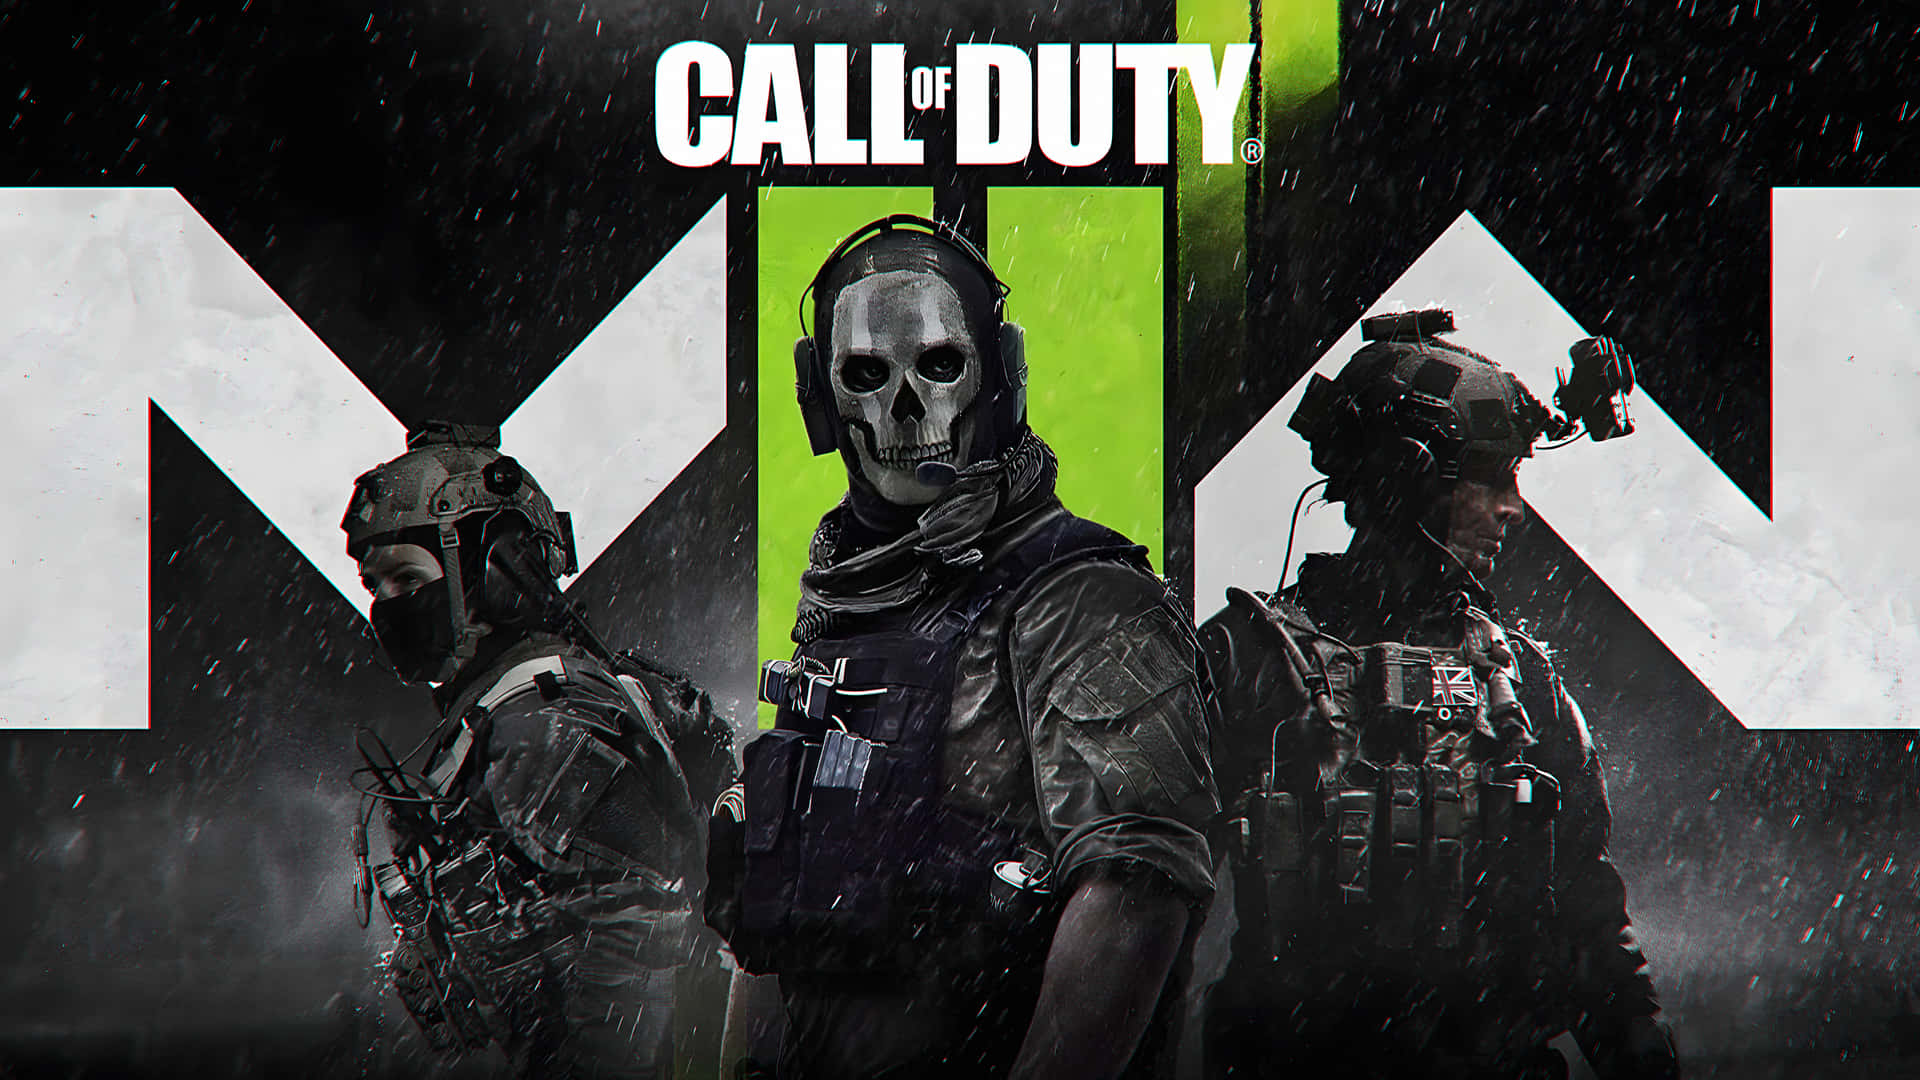 Call Of Duty 2020 With Masks Wallpaper